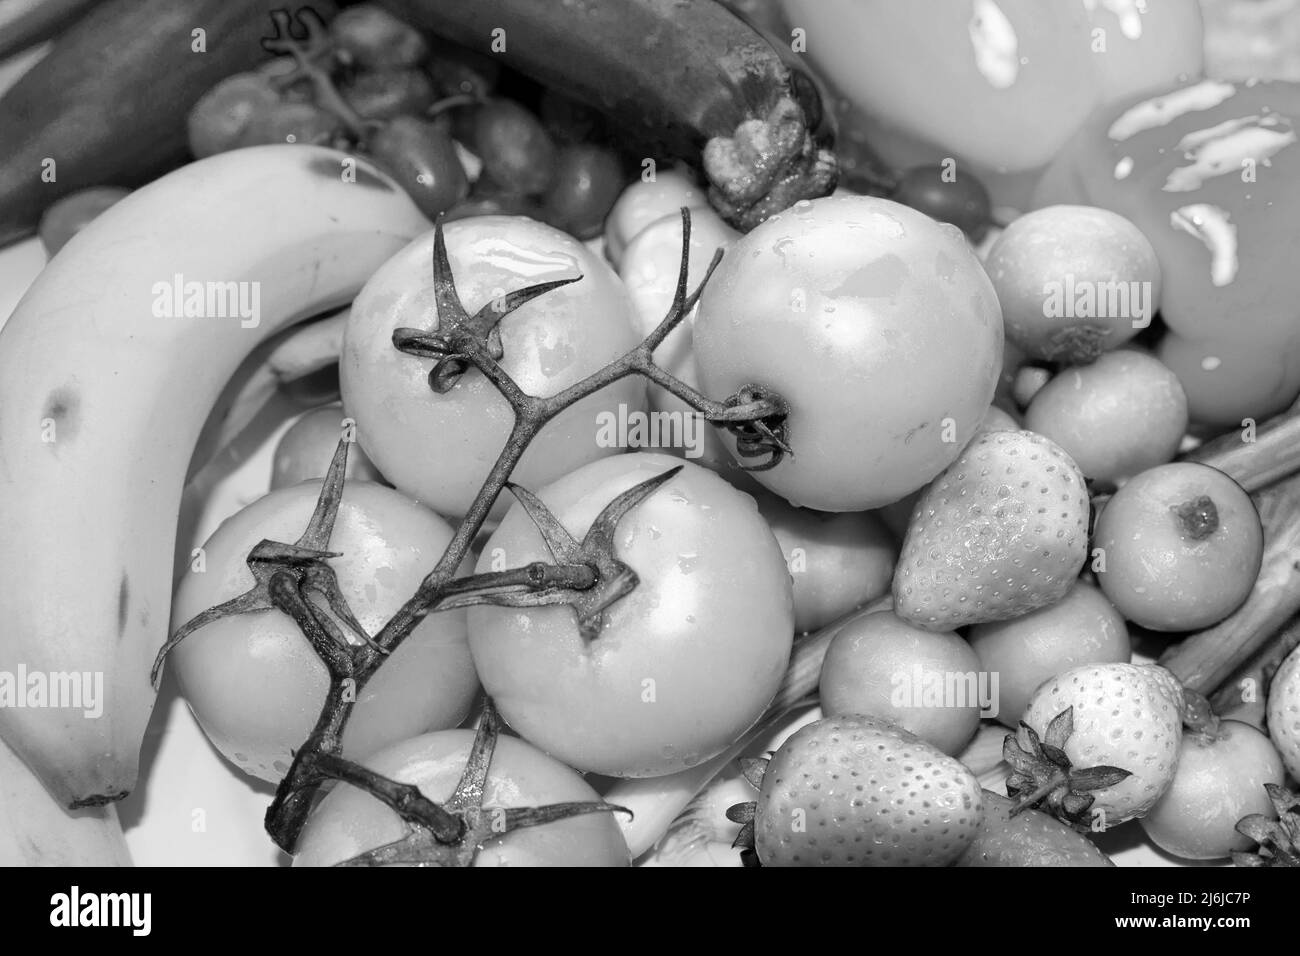 close up black and white  image of fresh fruit,  A variety of succulent organic produce,  including  mouth watering tomatoes, strawberries Stock Photo